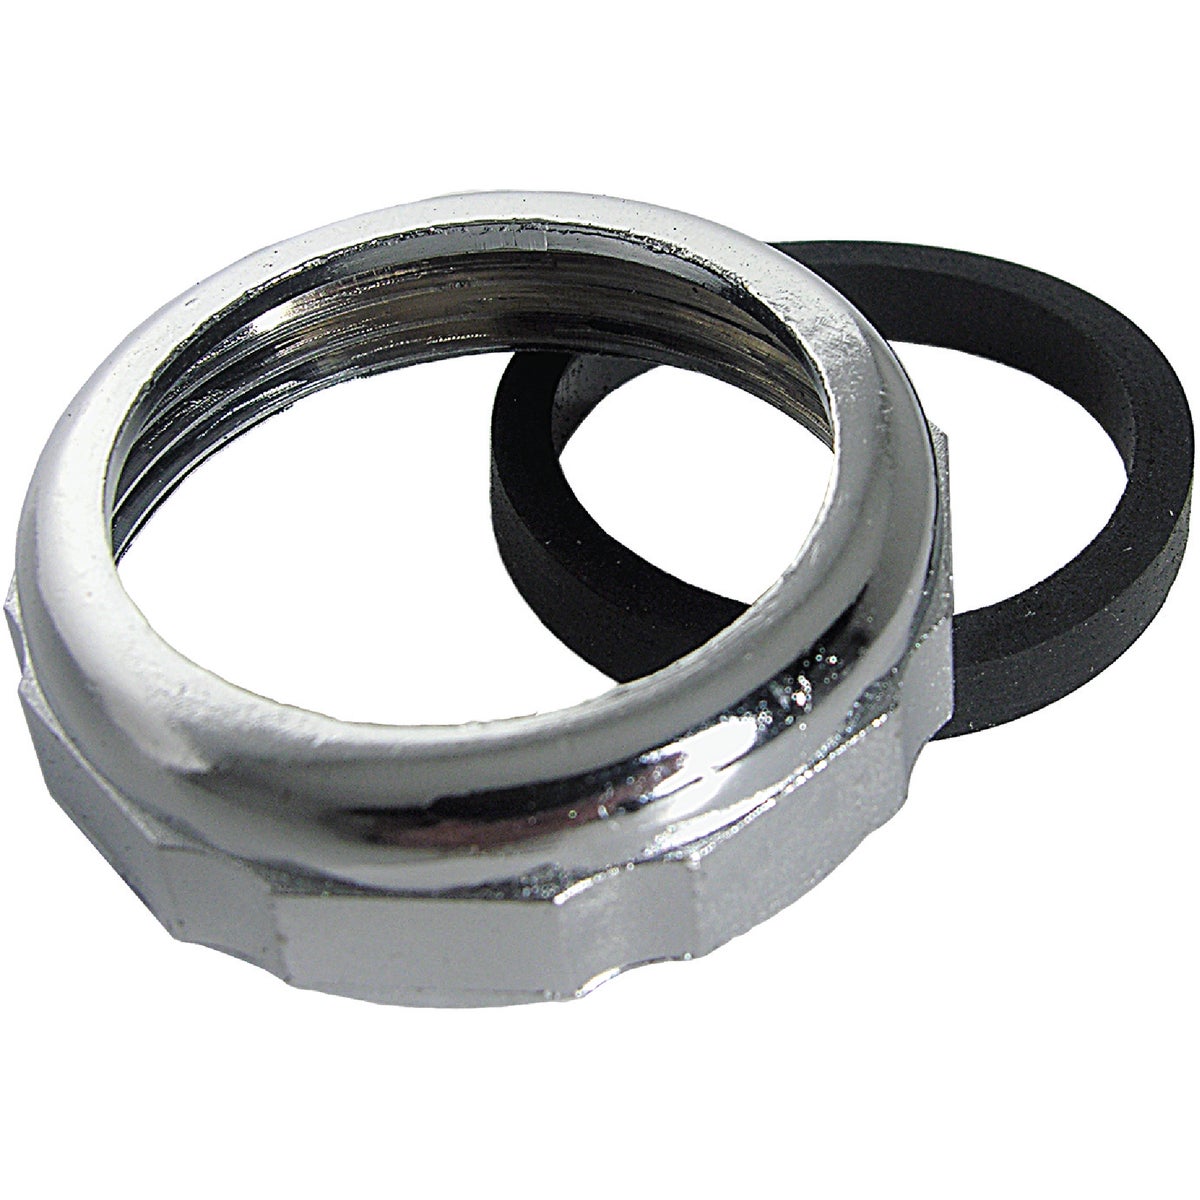 Lasco 1-1/4 In. x 1-1/4 In. Chrome Plated Slip Joint Nut and Washer